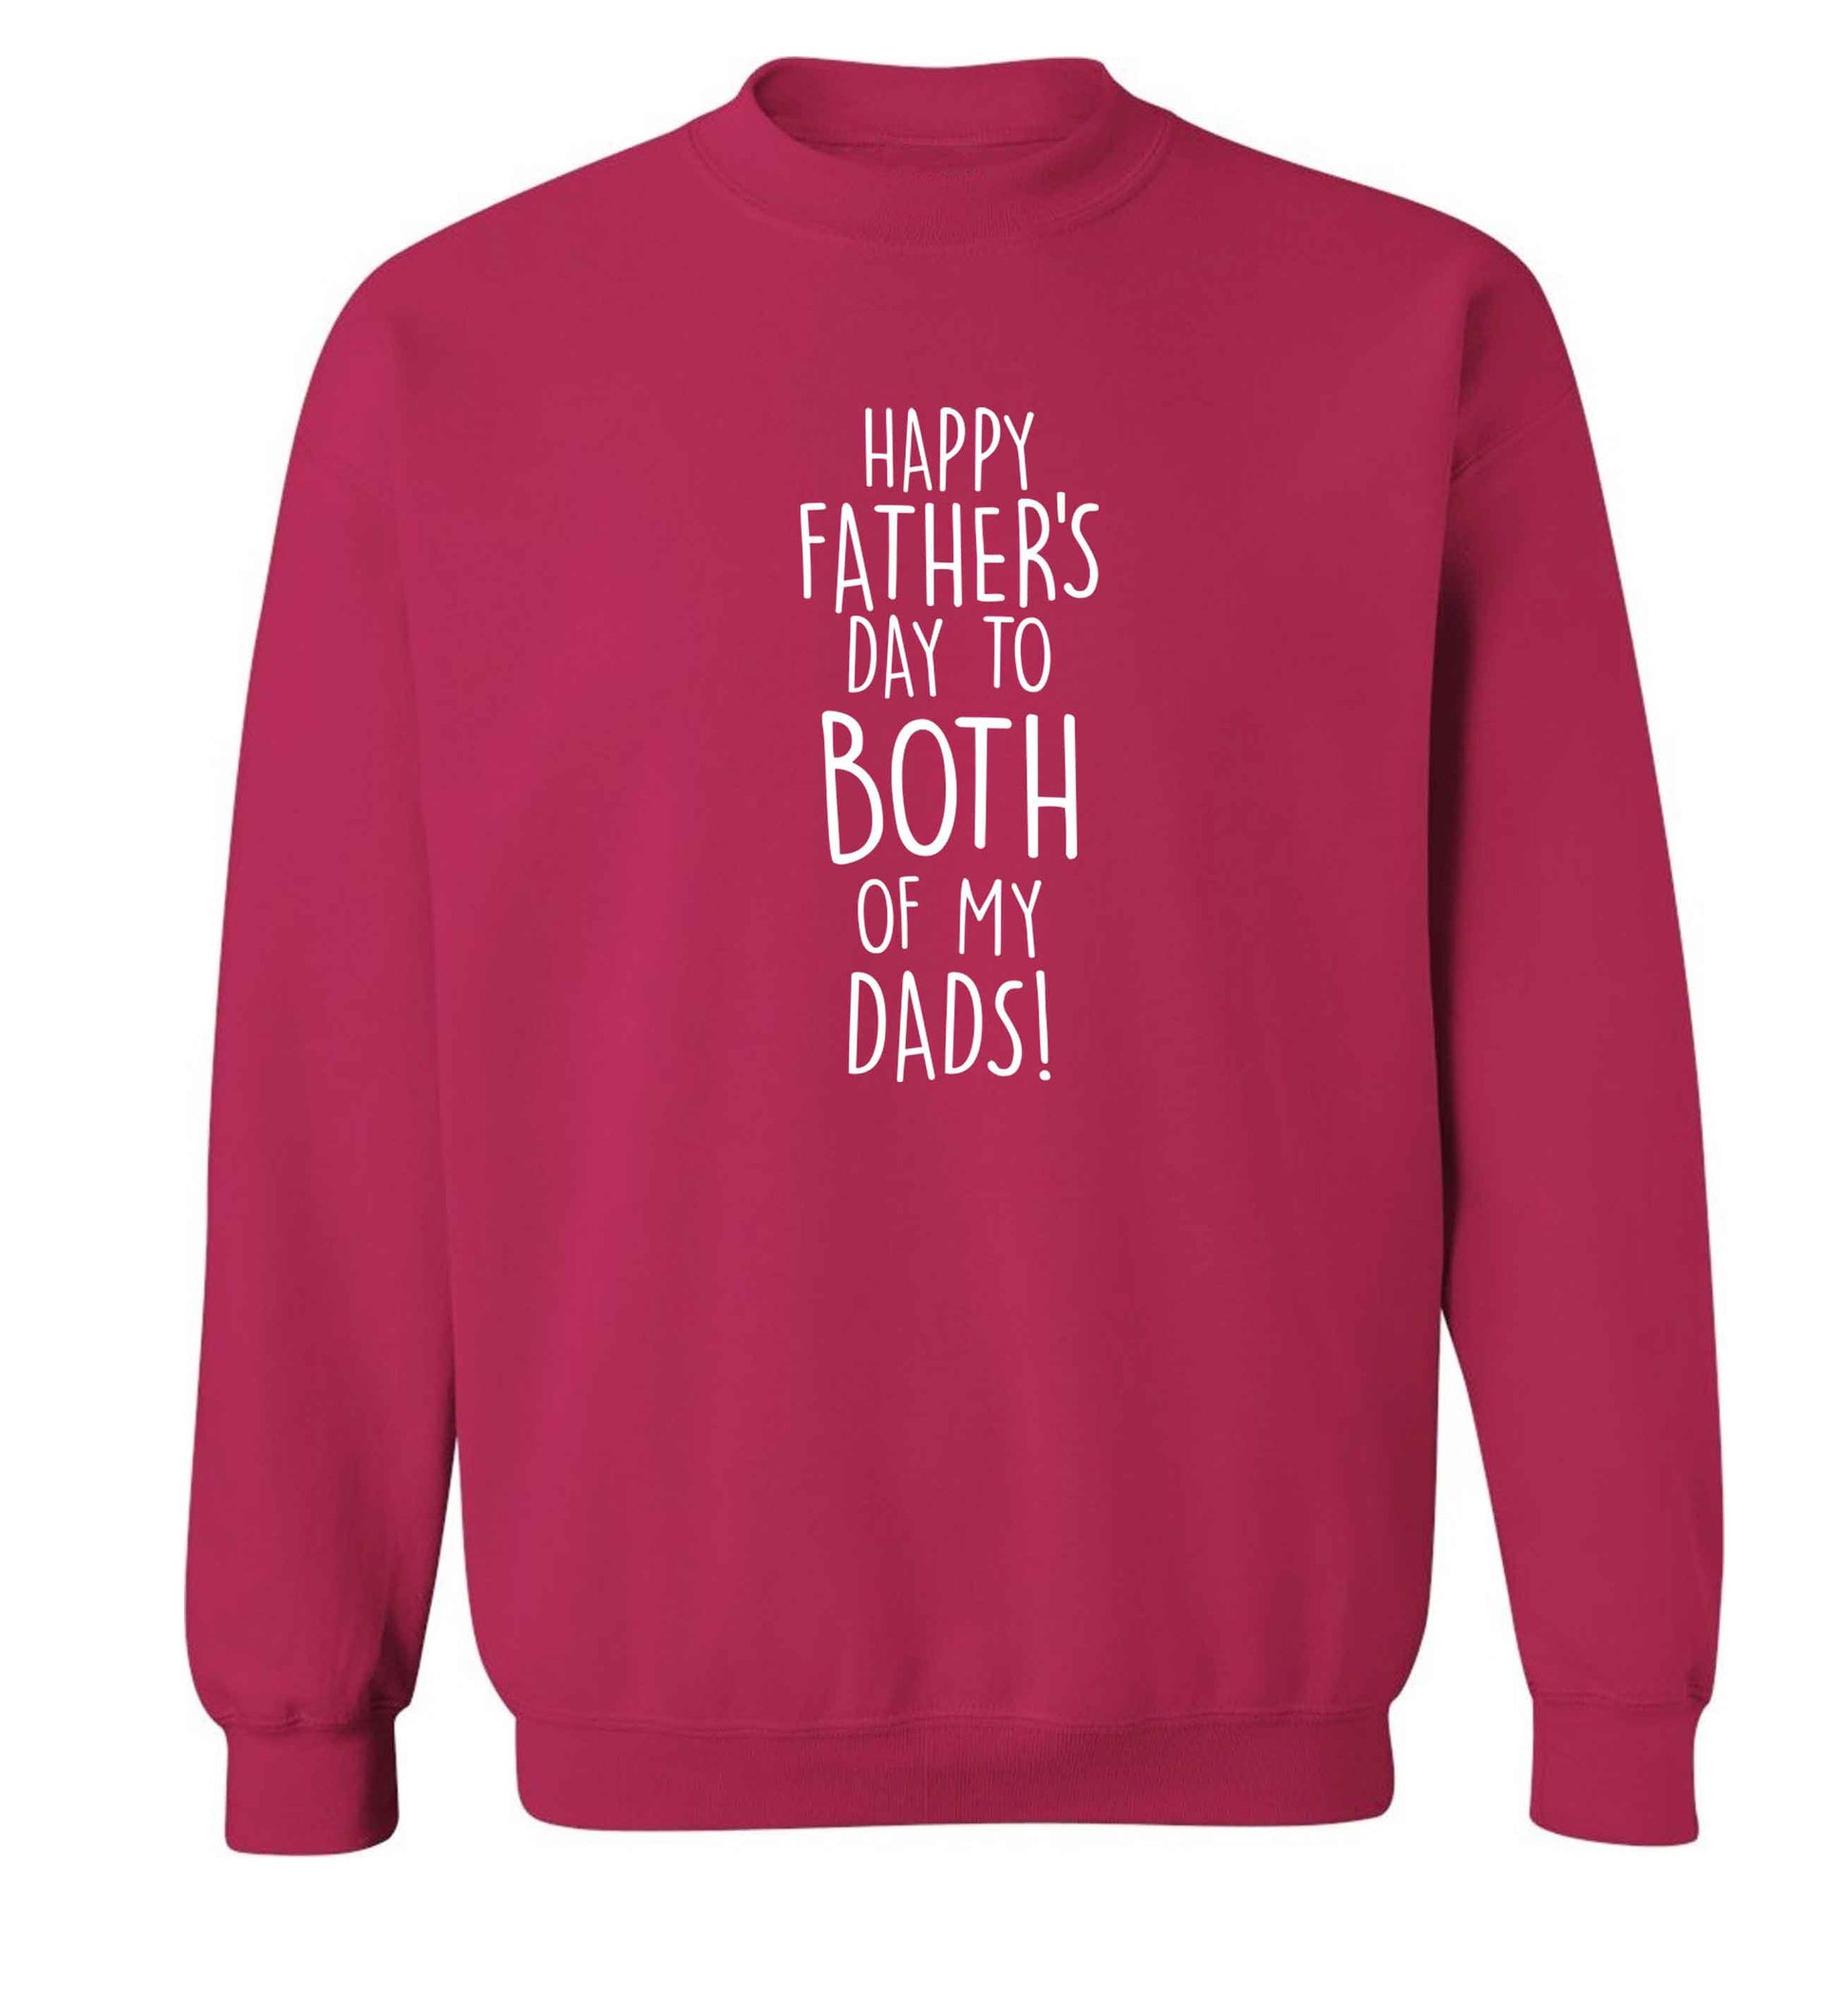 Happy Father's day to both of my dads adult's unisex pink sweater 2XL